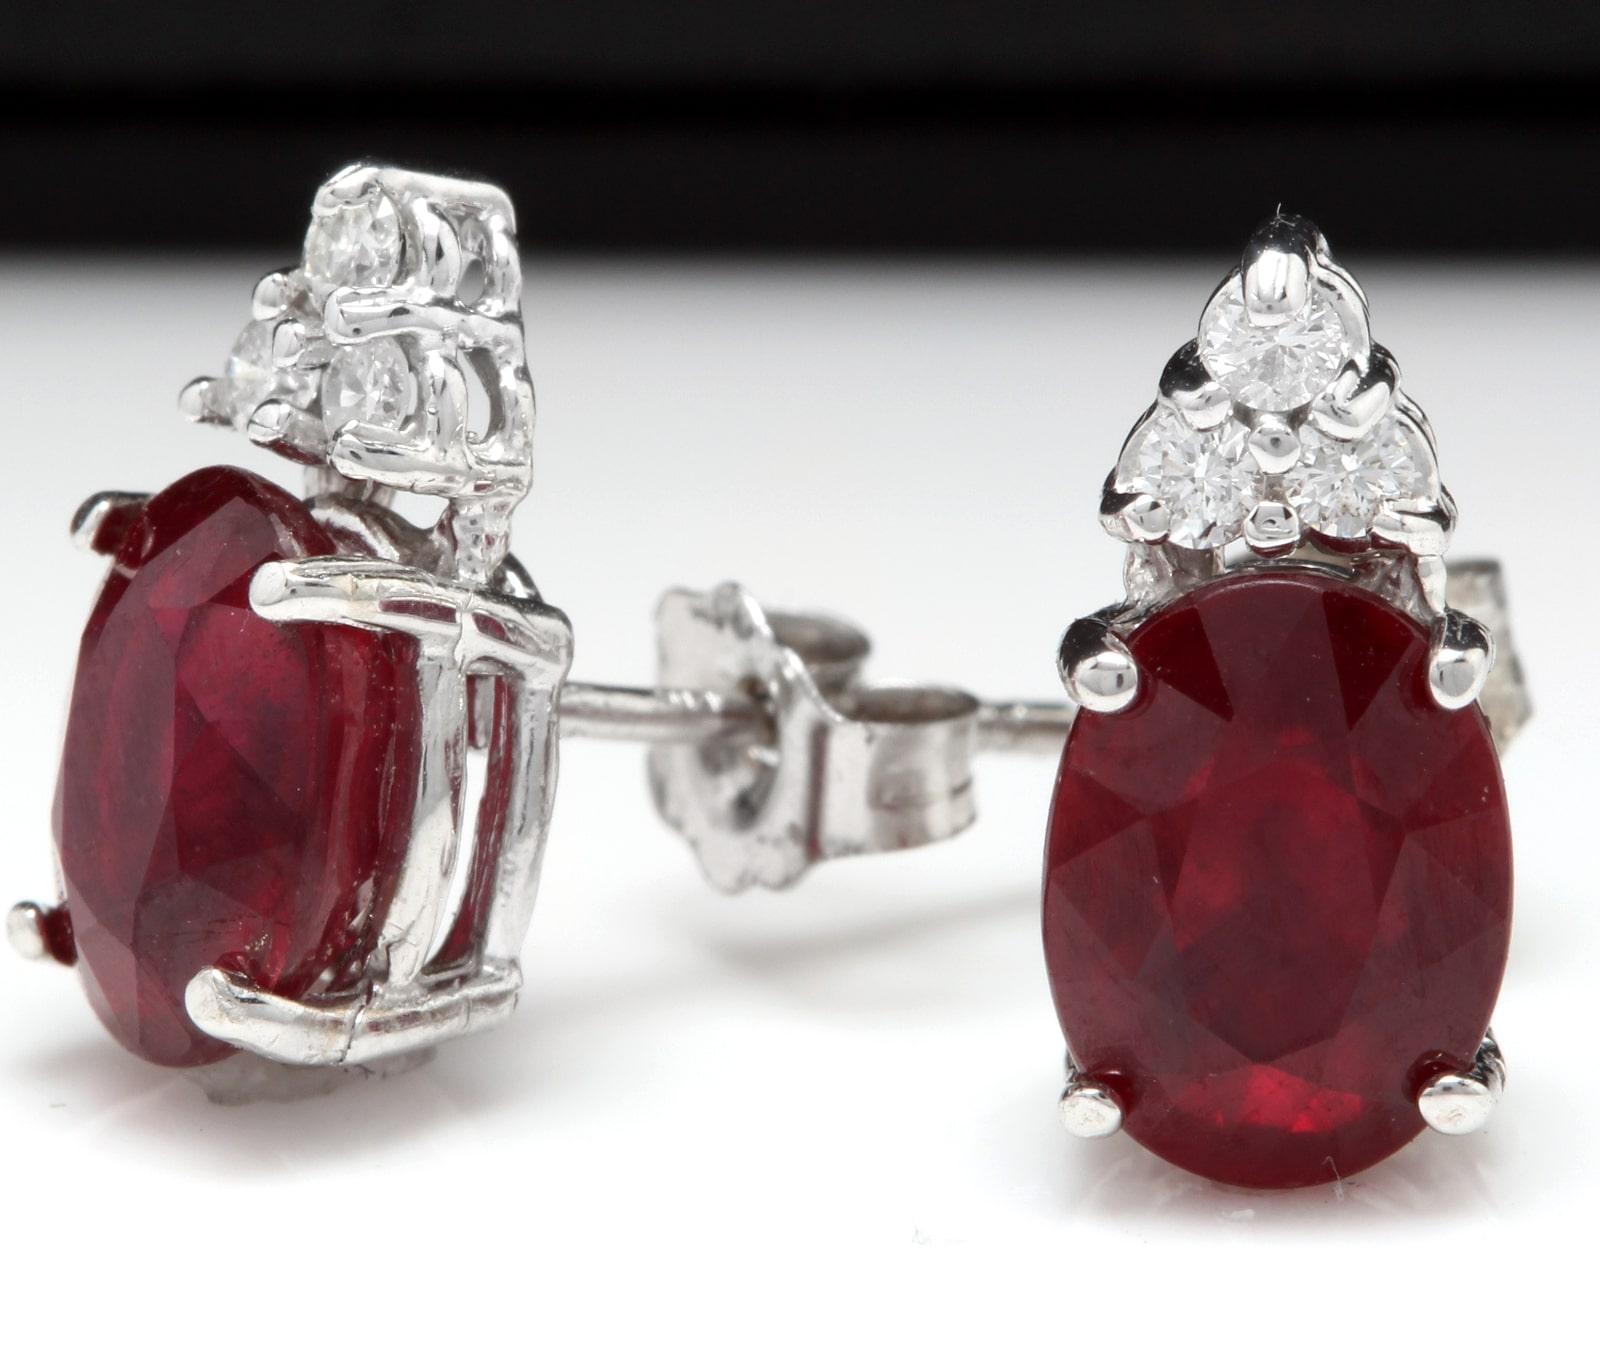 Exquisite 4.20 Carats Red Ruby and Natural Diamond 14K Solid White Gold Stud Earrings

Amazing looking piece!

Total Natural Round Cut White Diamonds Weight: .20 Carats (color G-H / Clarity SI2)

Total Oval Cut Red Rubies Weight: 4.00 Carats (Lead